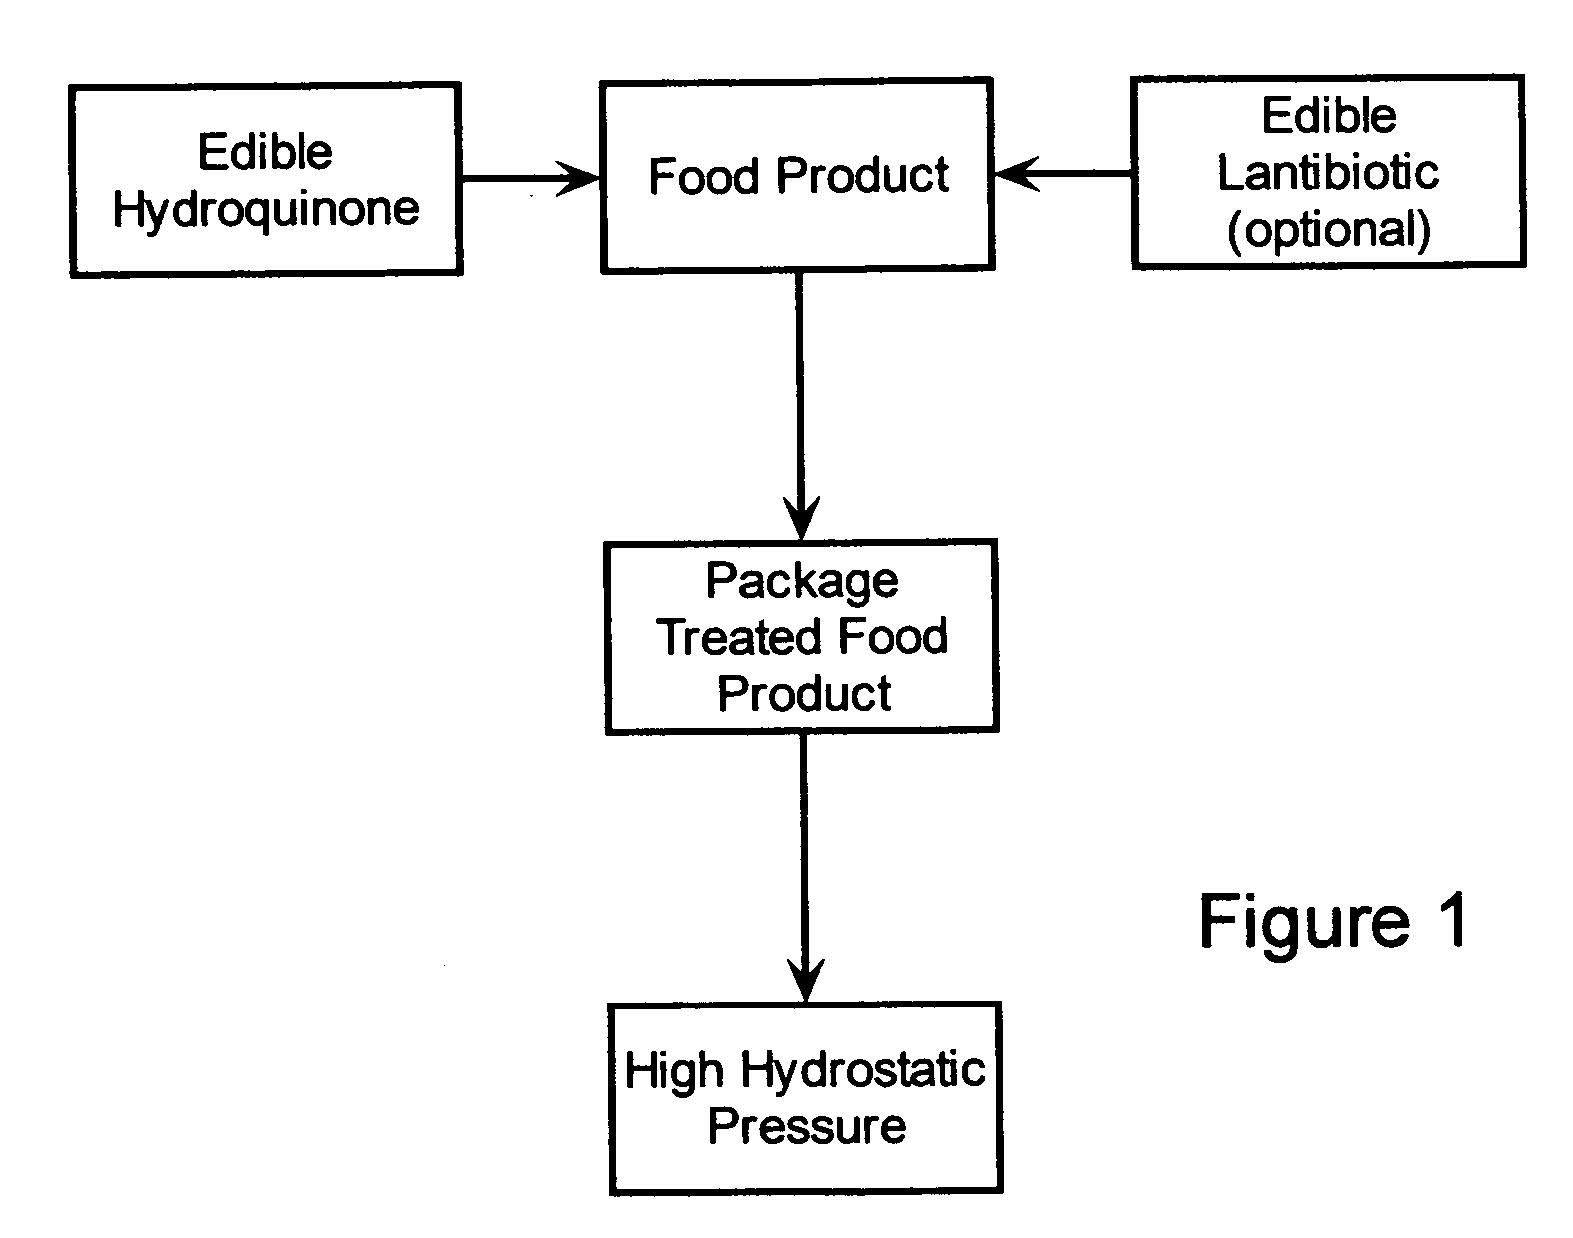 Methods for preserving food products